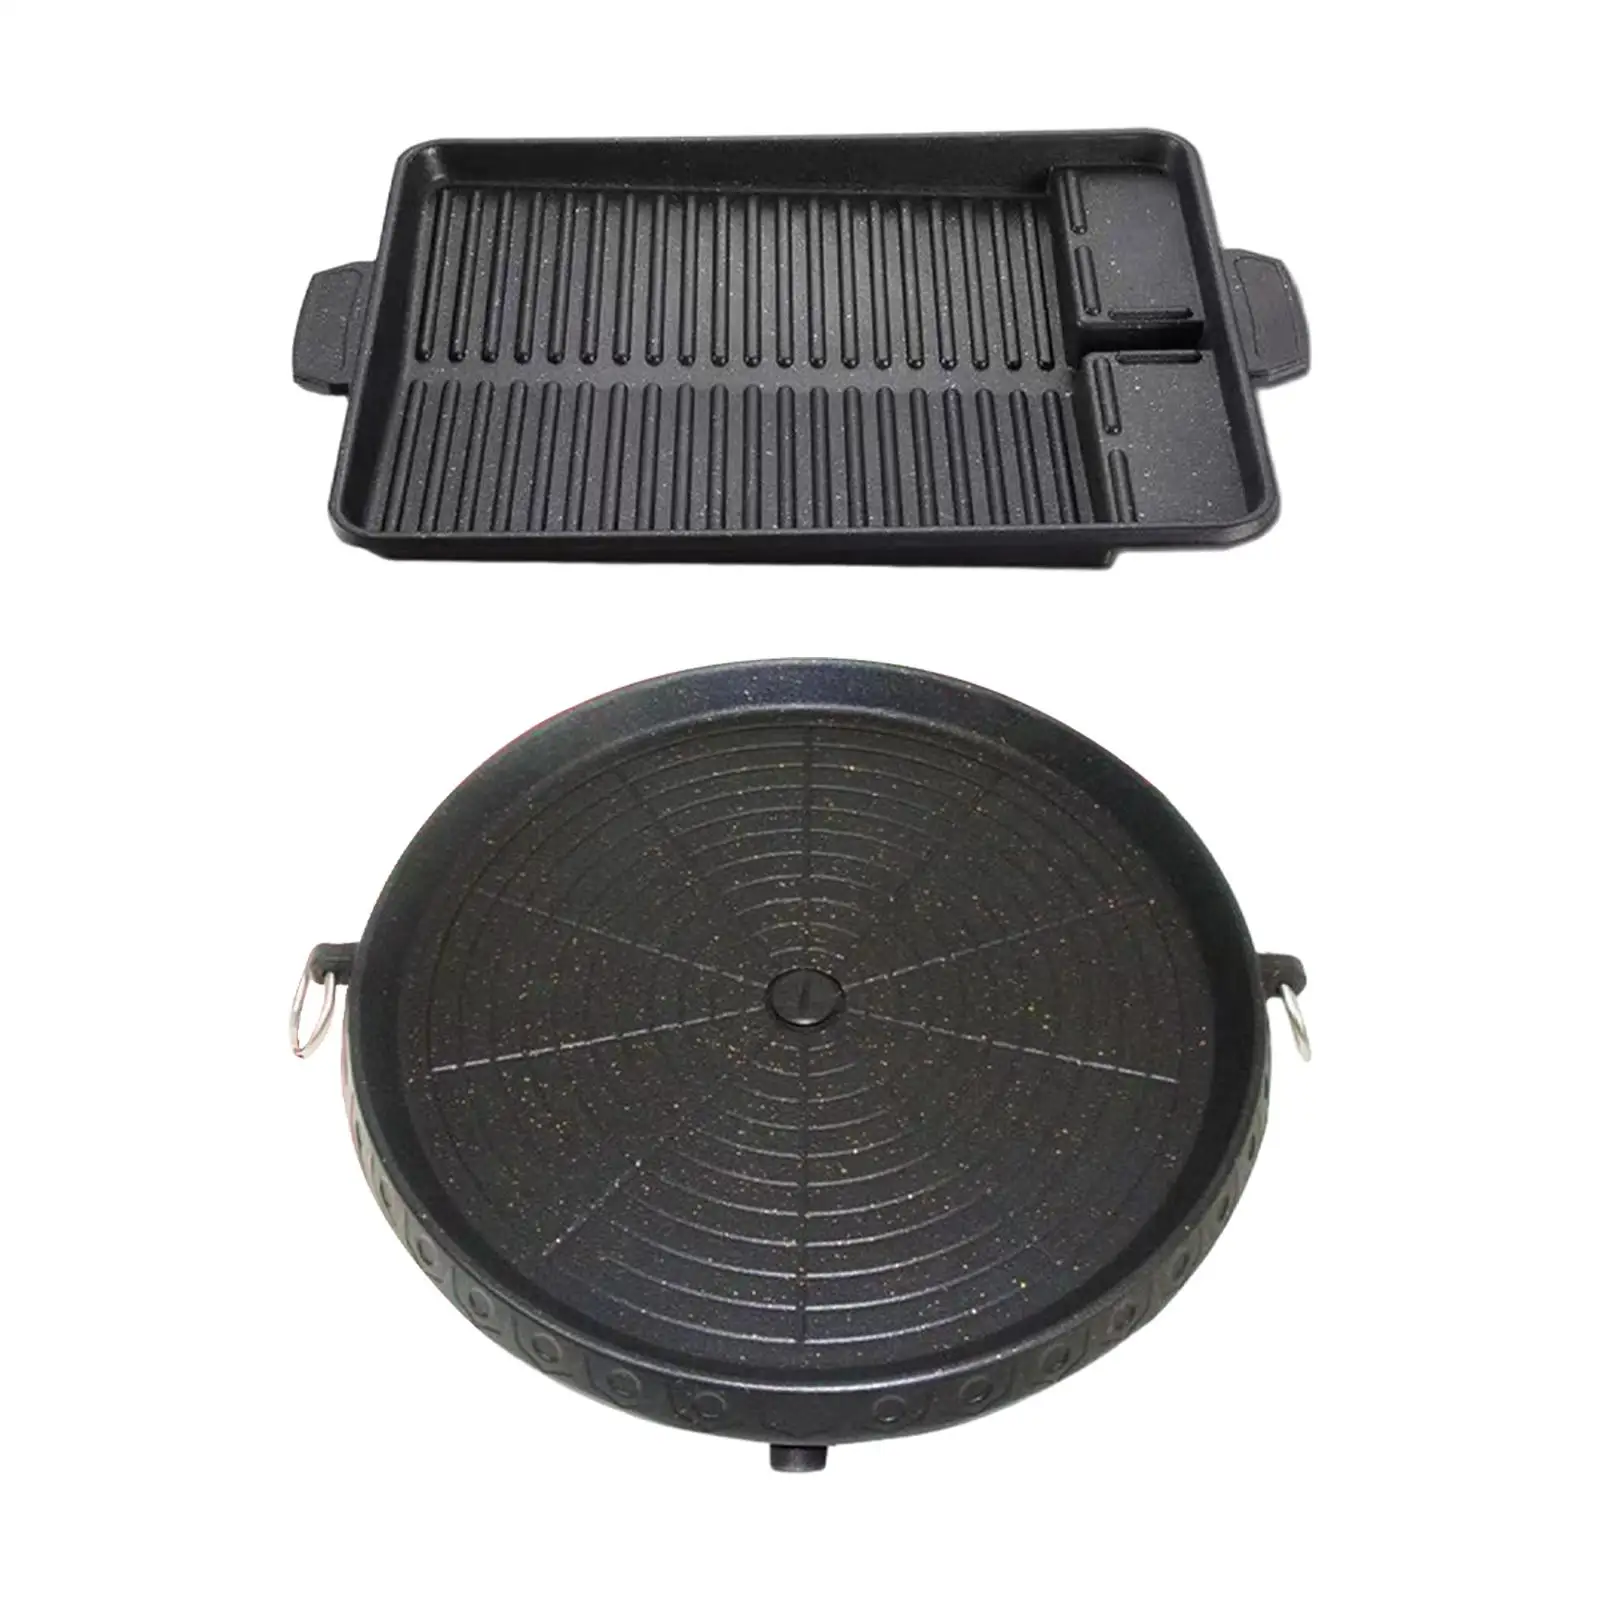 Korean BBQ Grill Pan Easy to Clean Grilling Pan for Outdoor Travel Kitchen